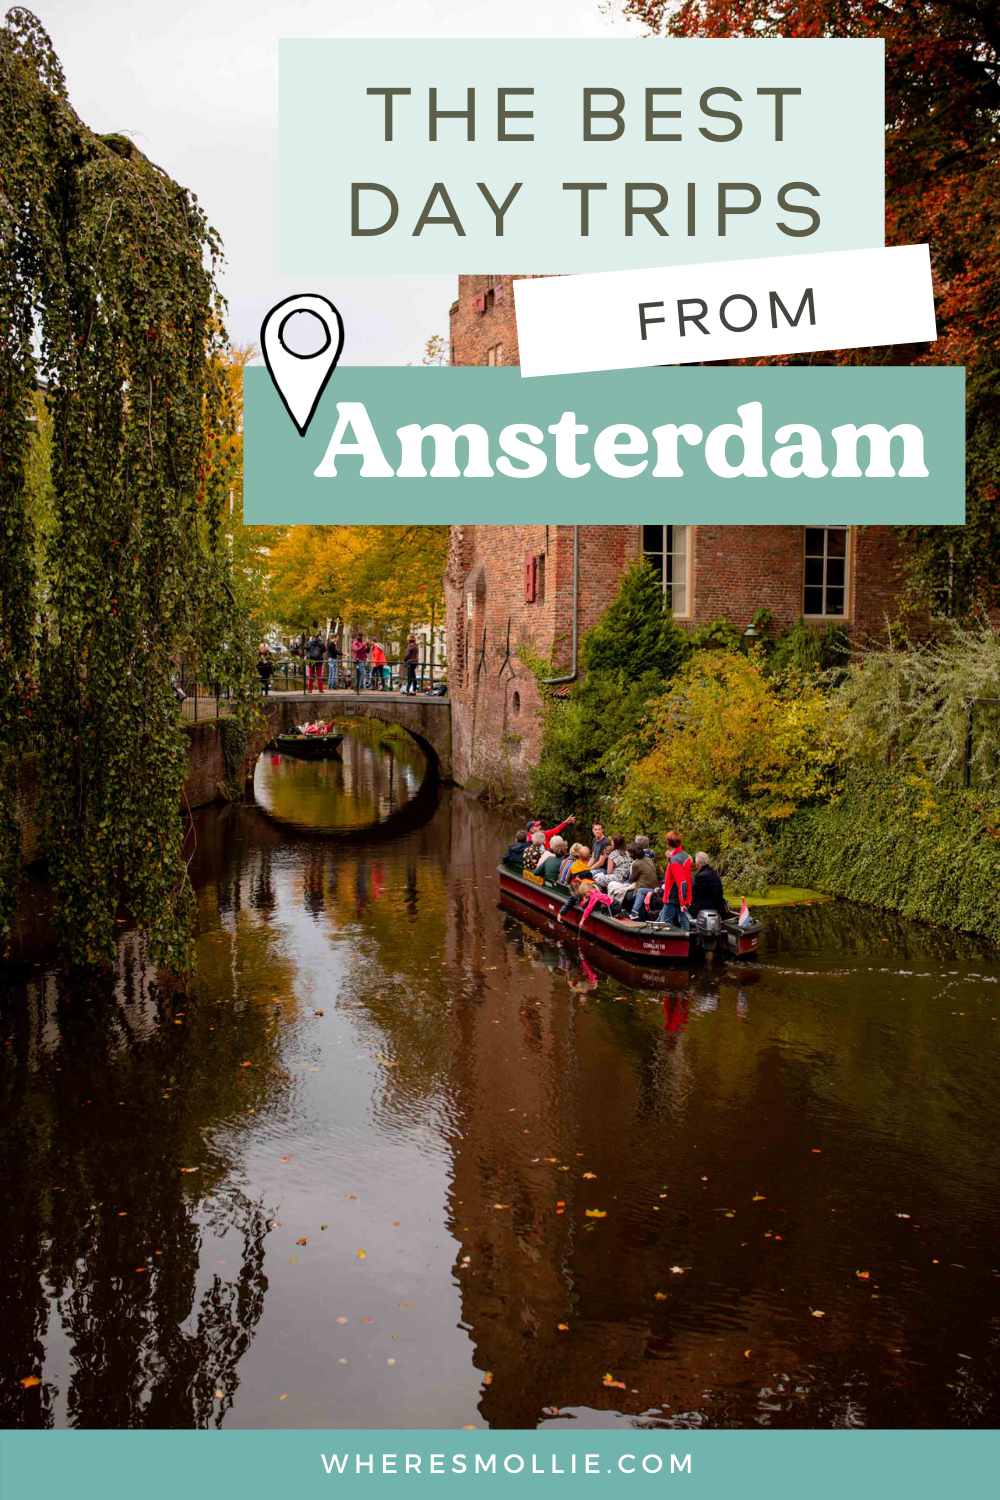 The best day trips from Amsterdam, the Netherlands